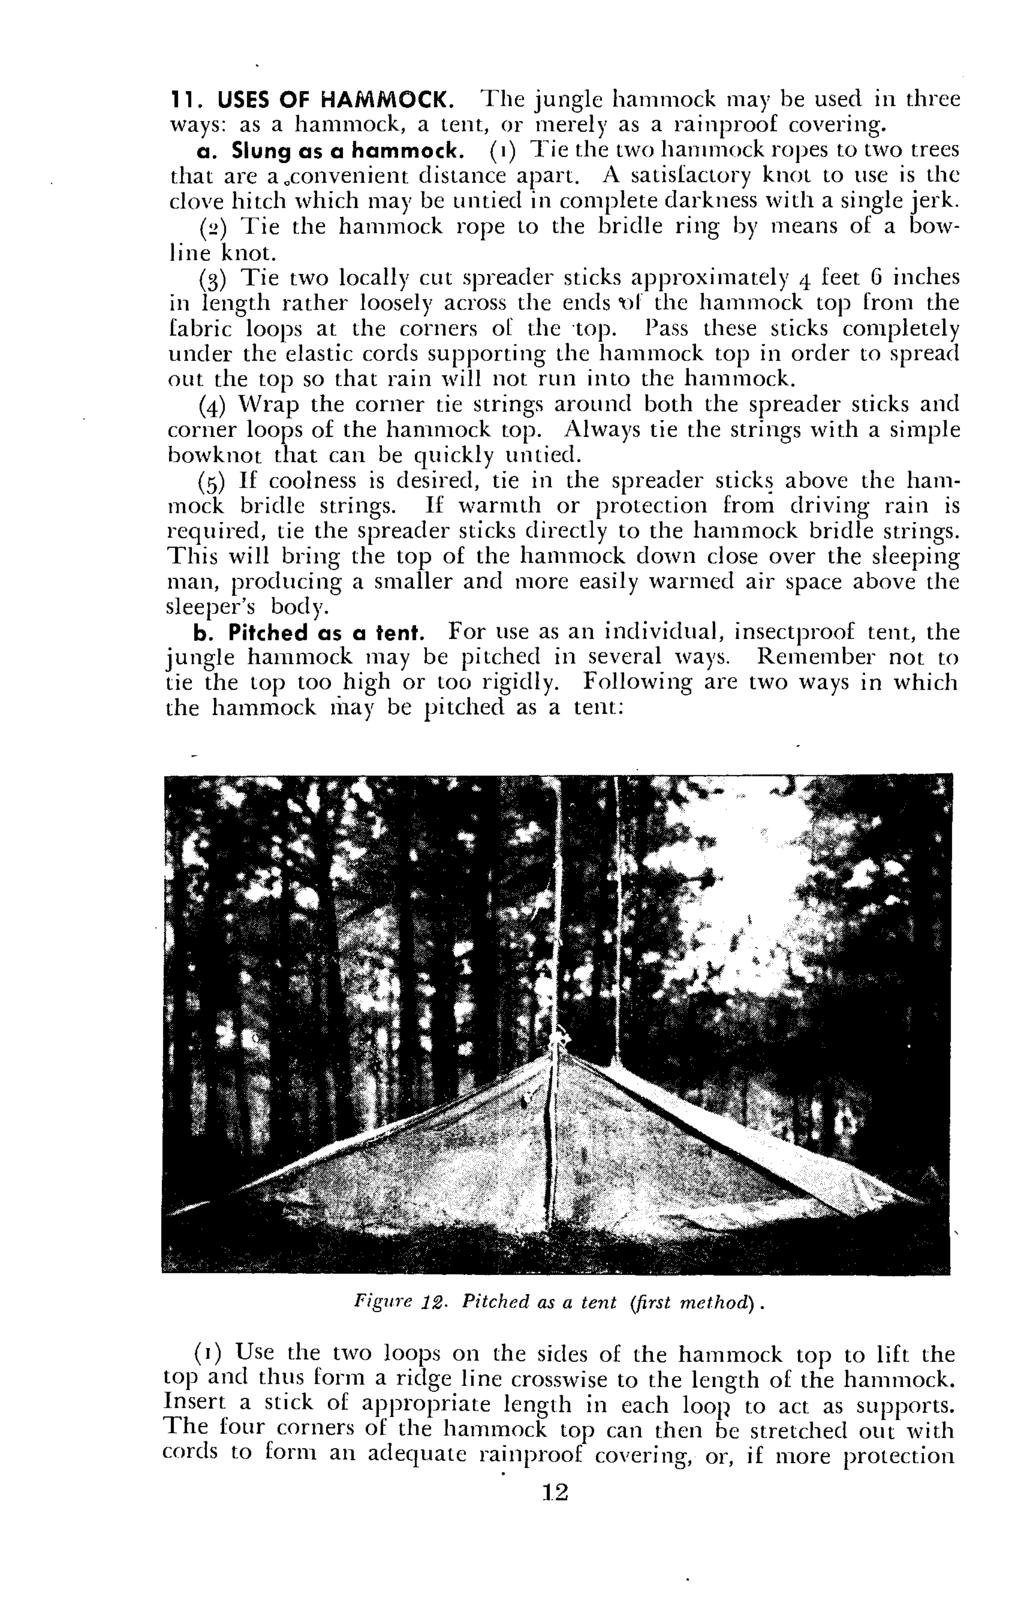 11. USES OF HAMMOCK. The jungle hammock may be used in three ways: as a hammock, a tent, or merely as a rainproof covering. a. Slung as a hammock.